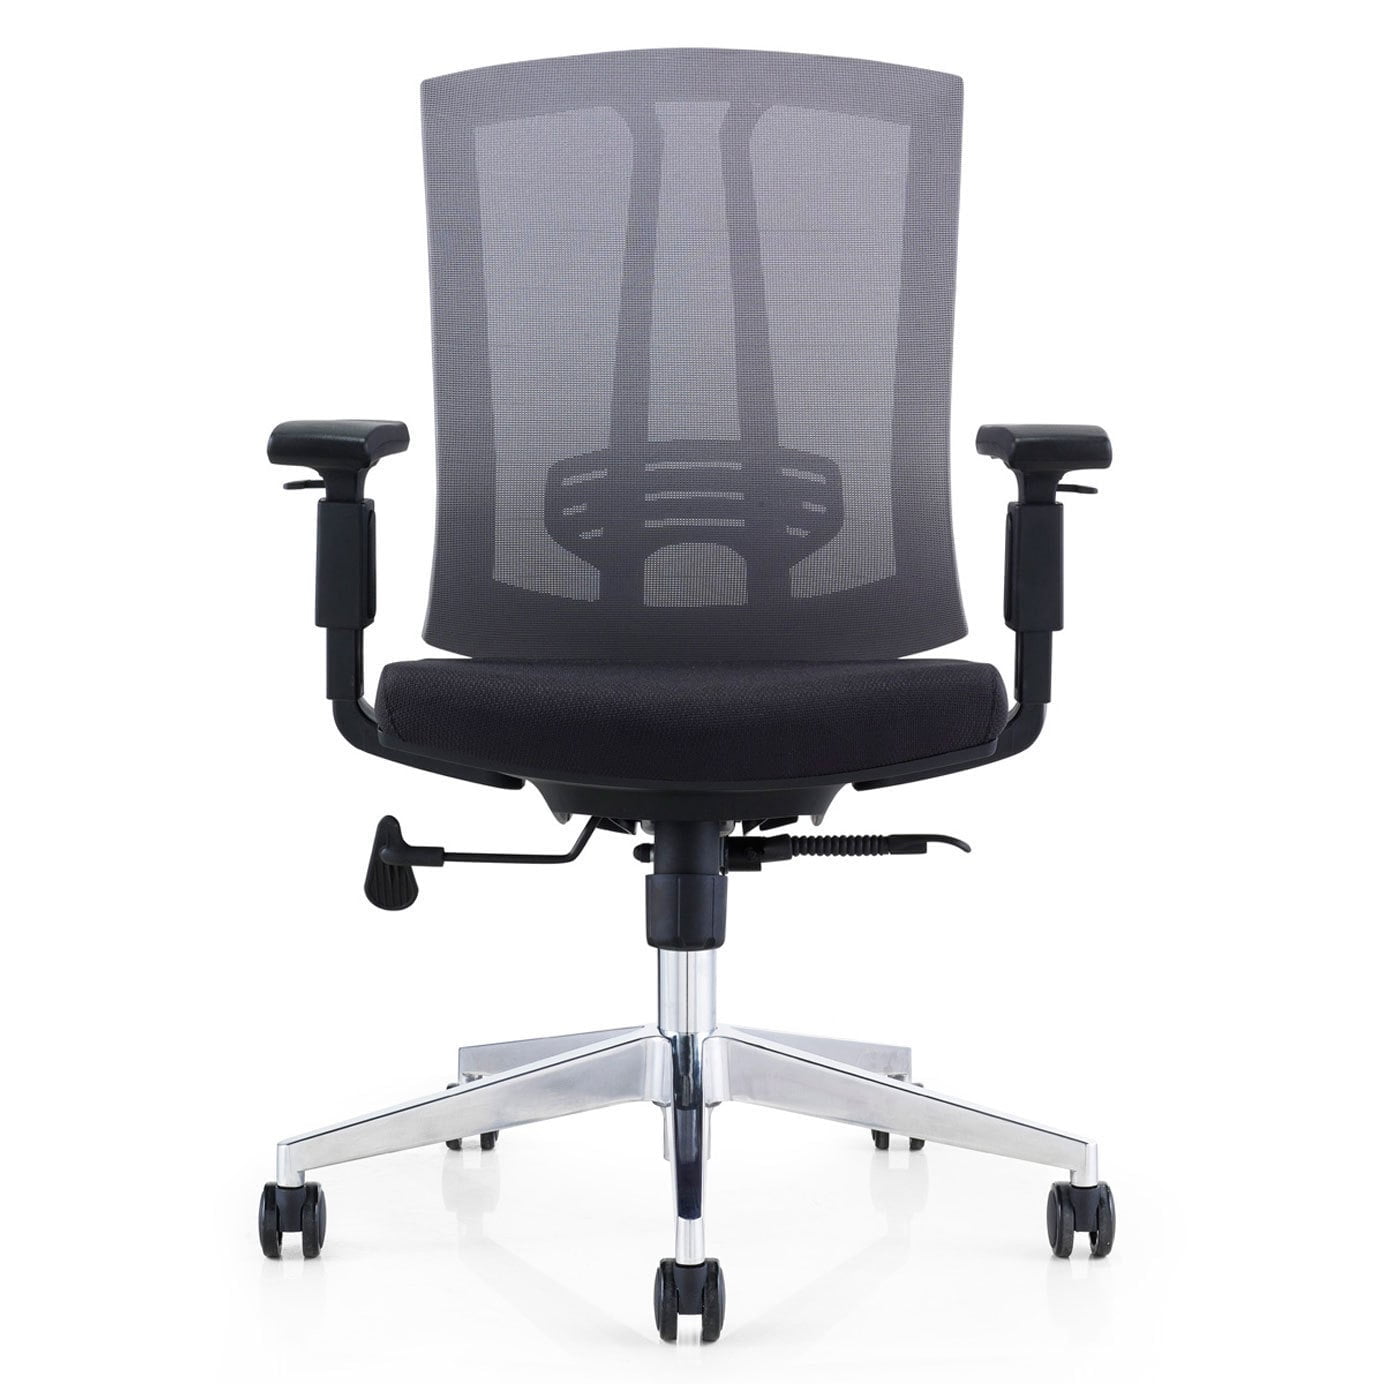 QUALITY STYLISH PADDED MESH SEAT COMPUTER PC OFFICE CHAIR POLISHED BLACK NEW